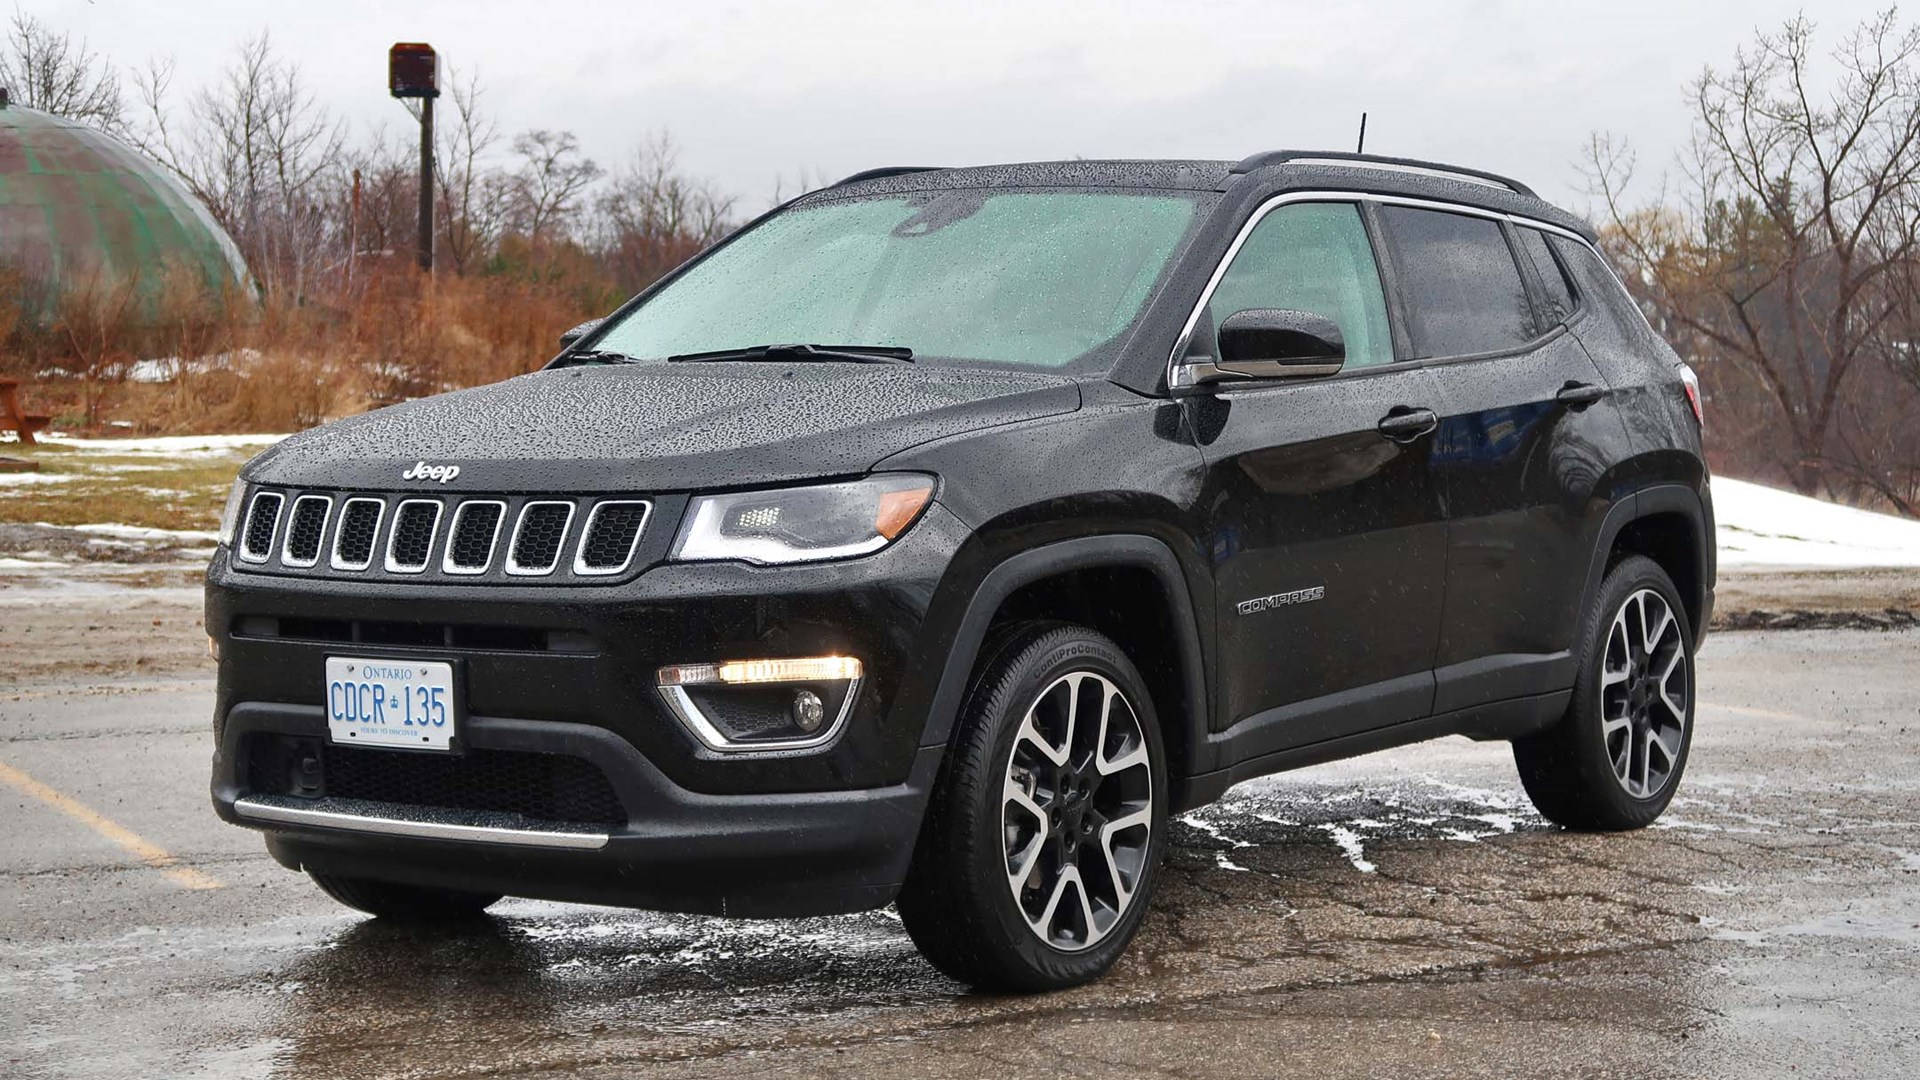 Captivating Black Jeep Compass on a Wet Road Wallpaper